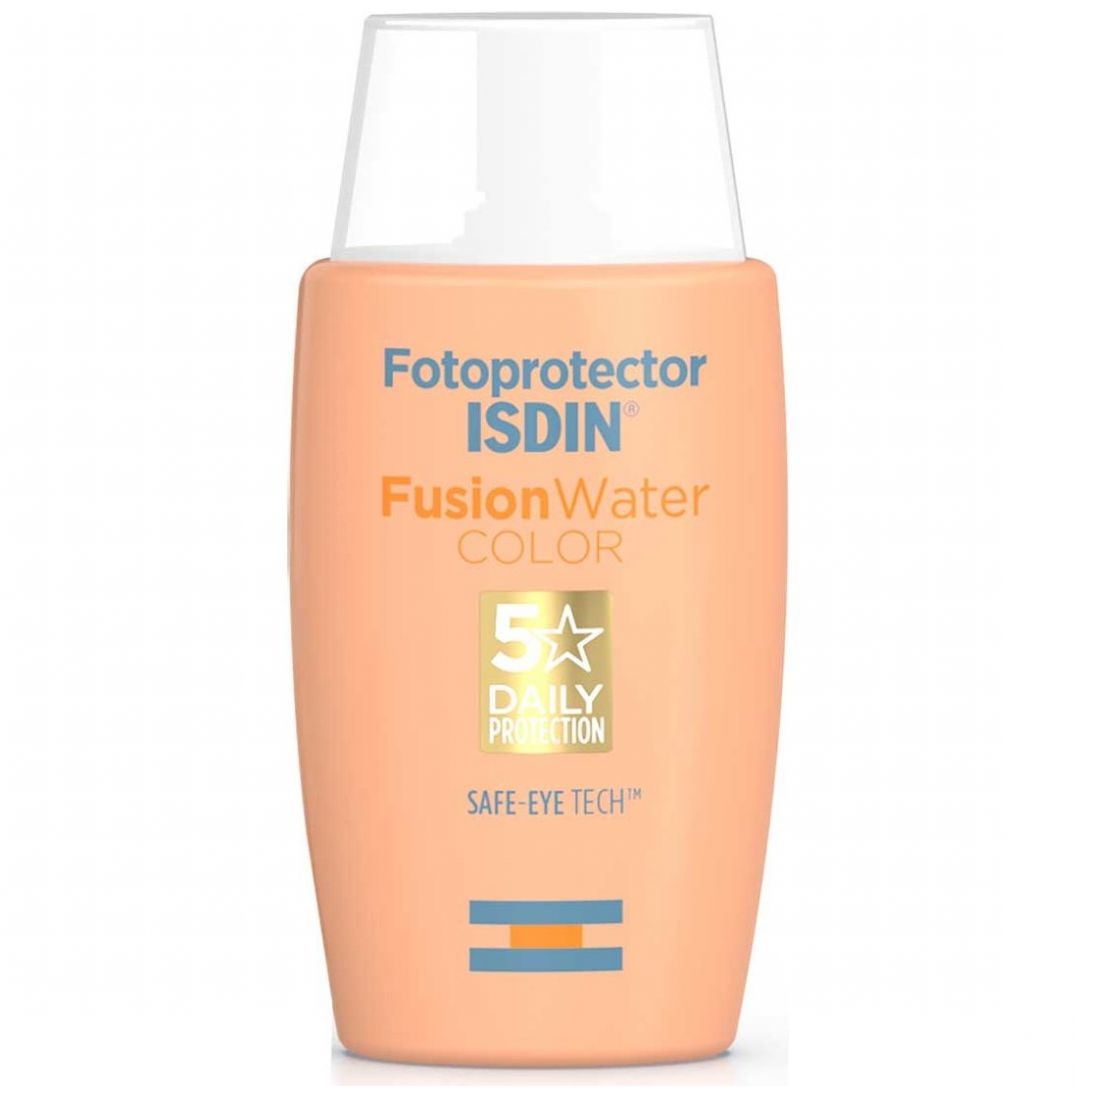 Fotoprotector 50 Fusion Water Color 50Ml Isdin